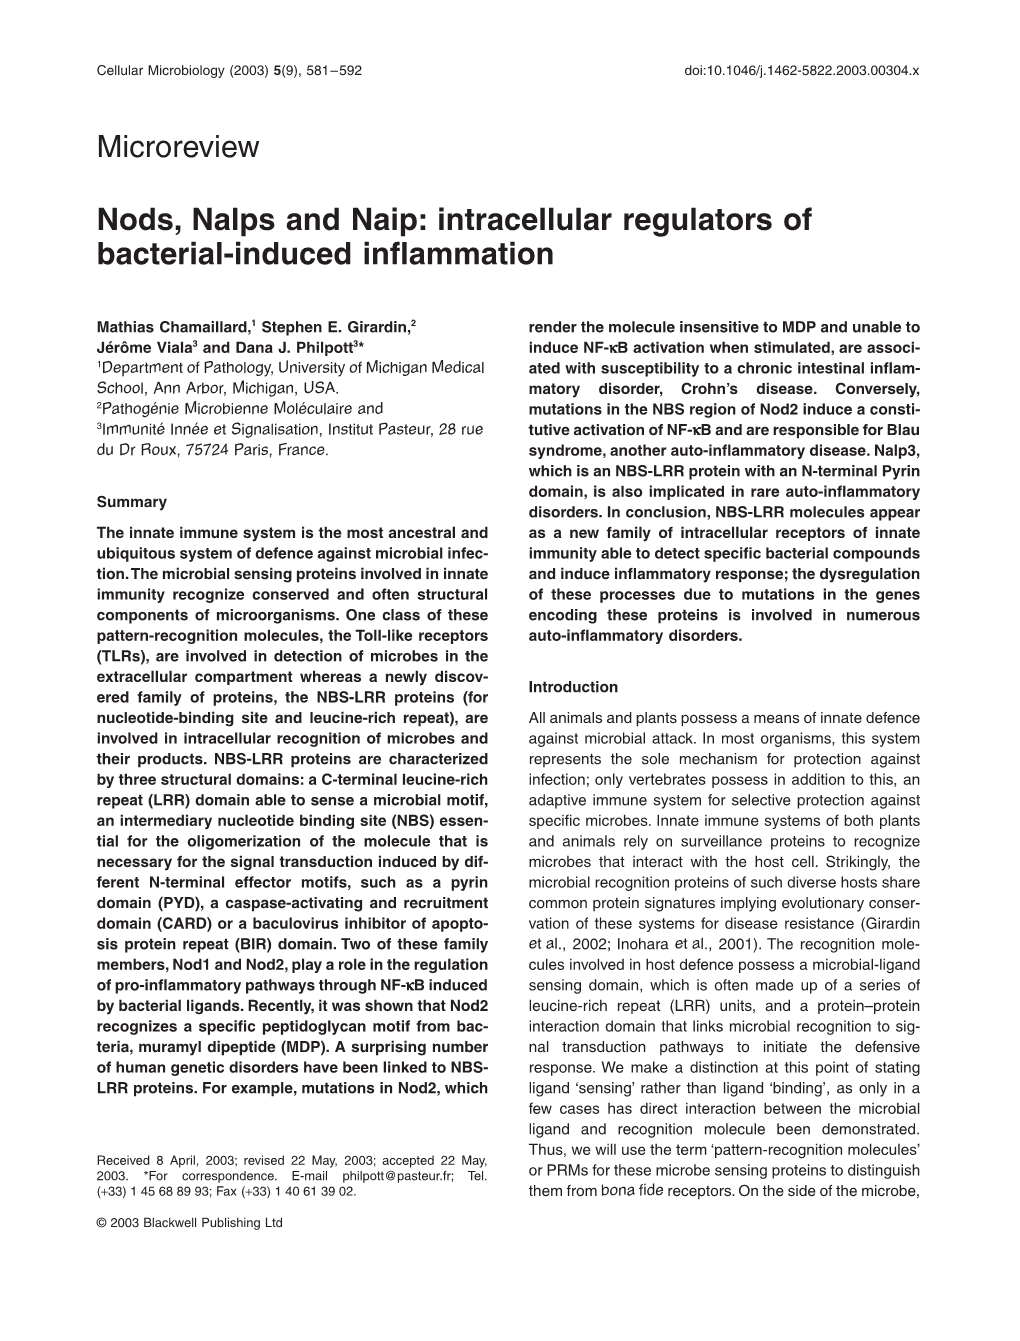 Nods, Nalps and Naip: Intracellular Regulators of Bacterial-Induced Inﬂammation